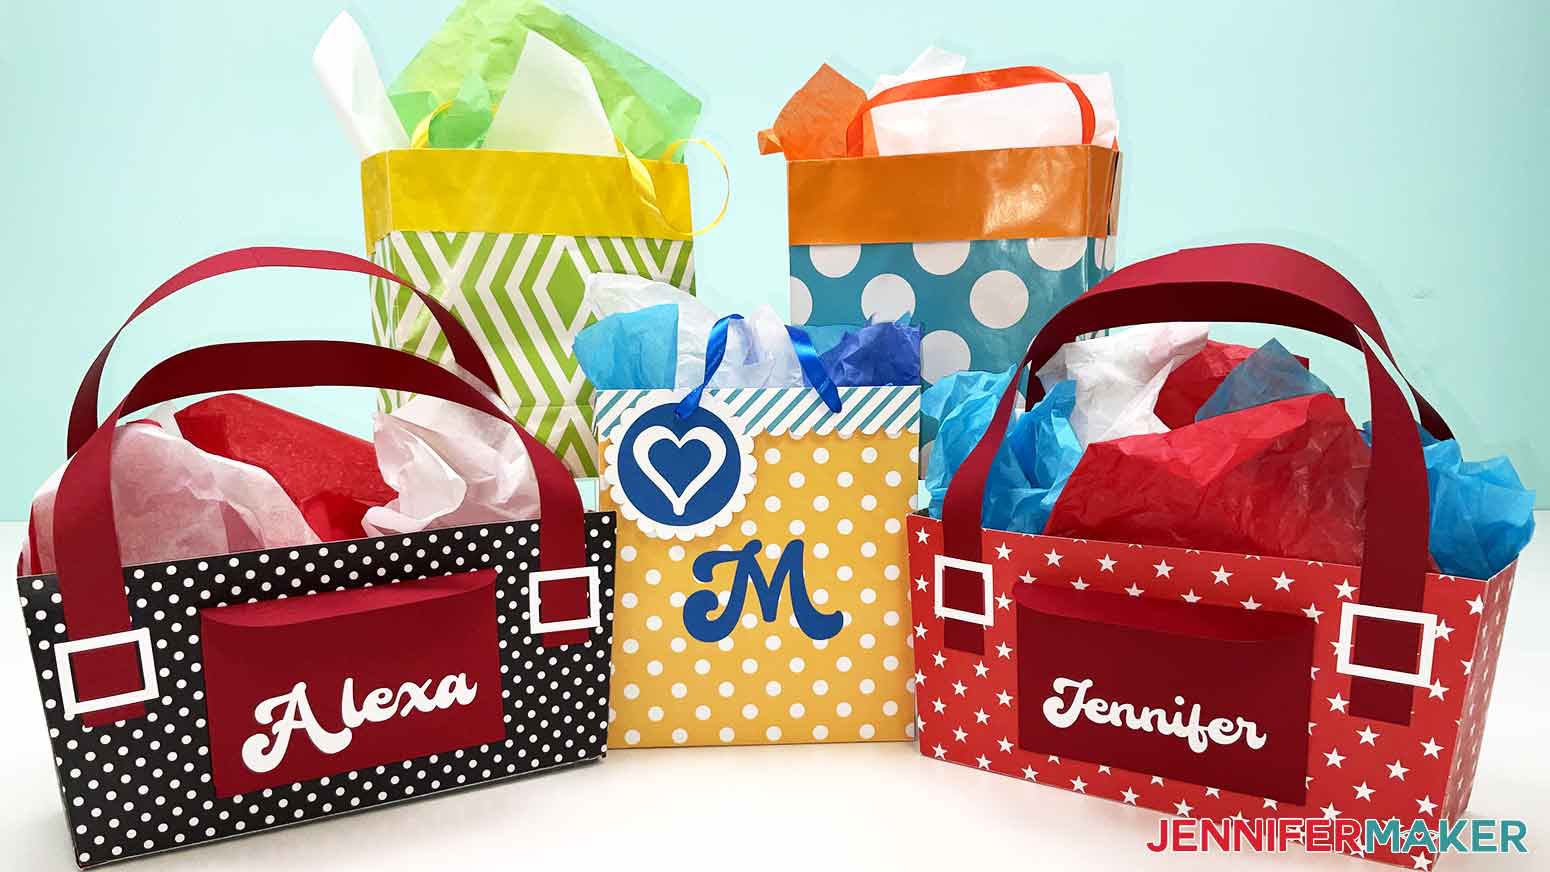 A photo showing five finished DIY gift bags with tissue paper inside. Two bags are made of wrapping paper, two are purse-shaped, and one is made of cardstock with an initial and gift tag on the front.